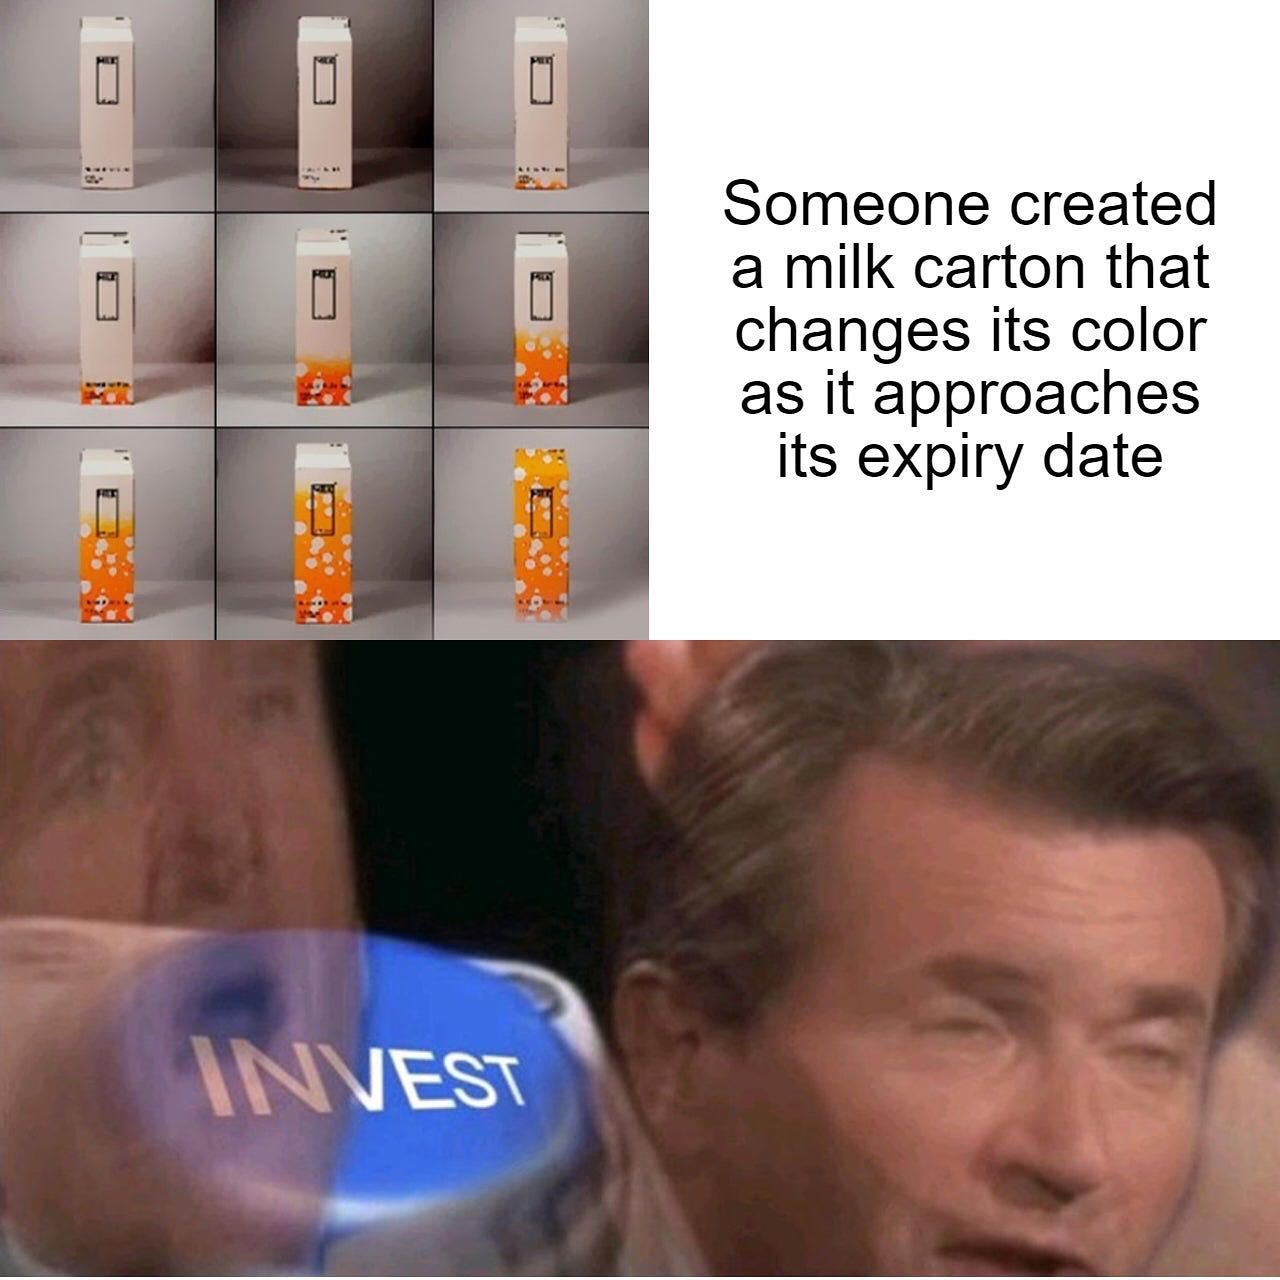 dank memes - milk carton - 0 Someone created a milk carton that changes its color as it approaches its expiry date Invest